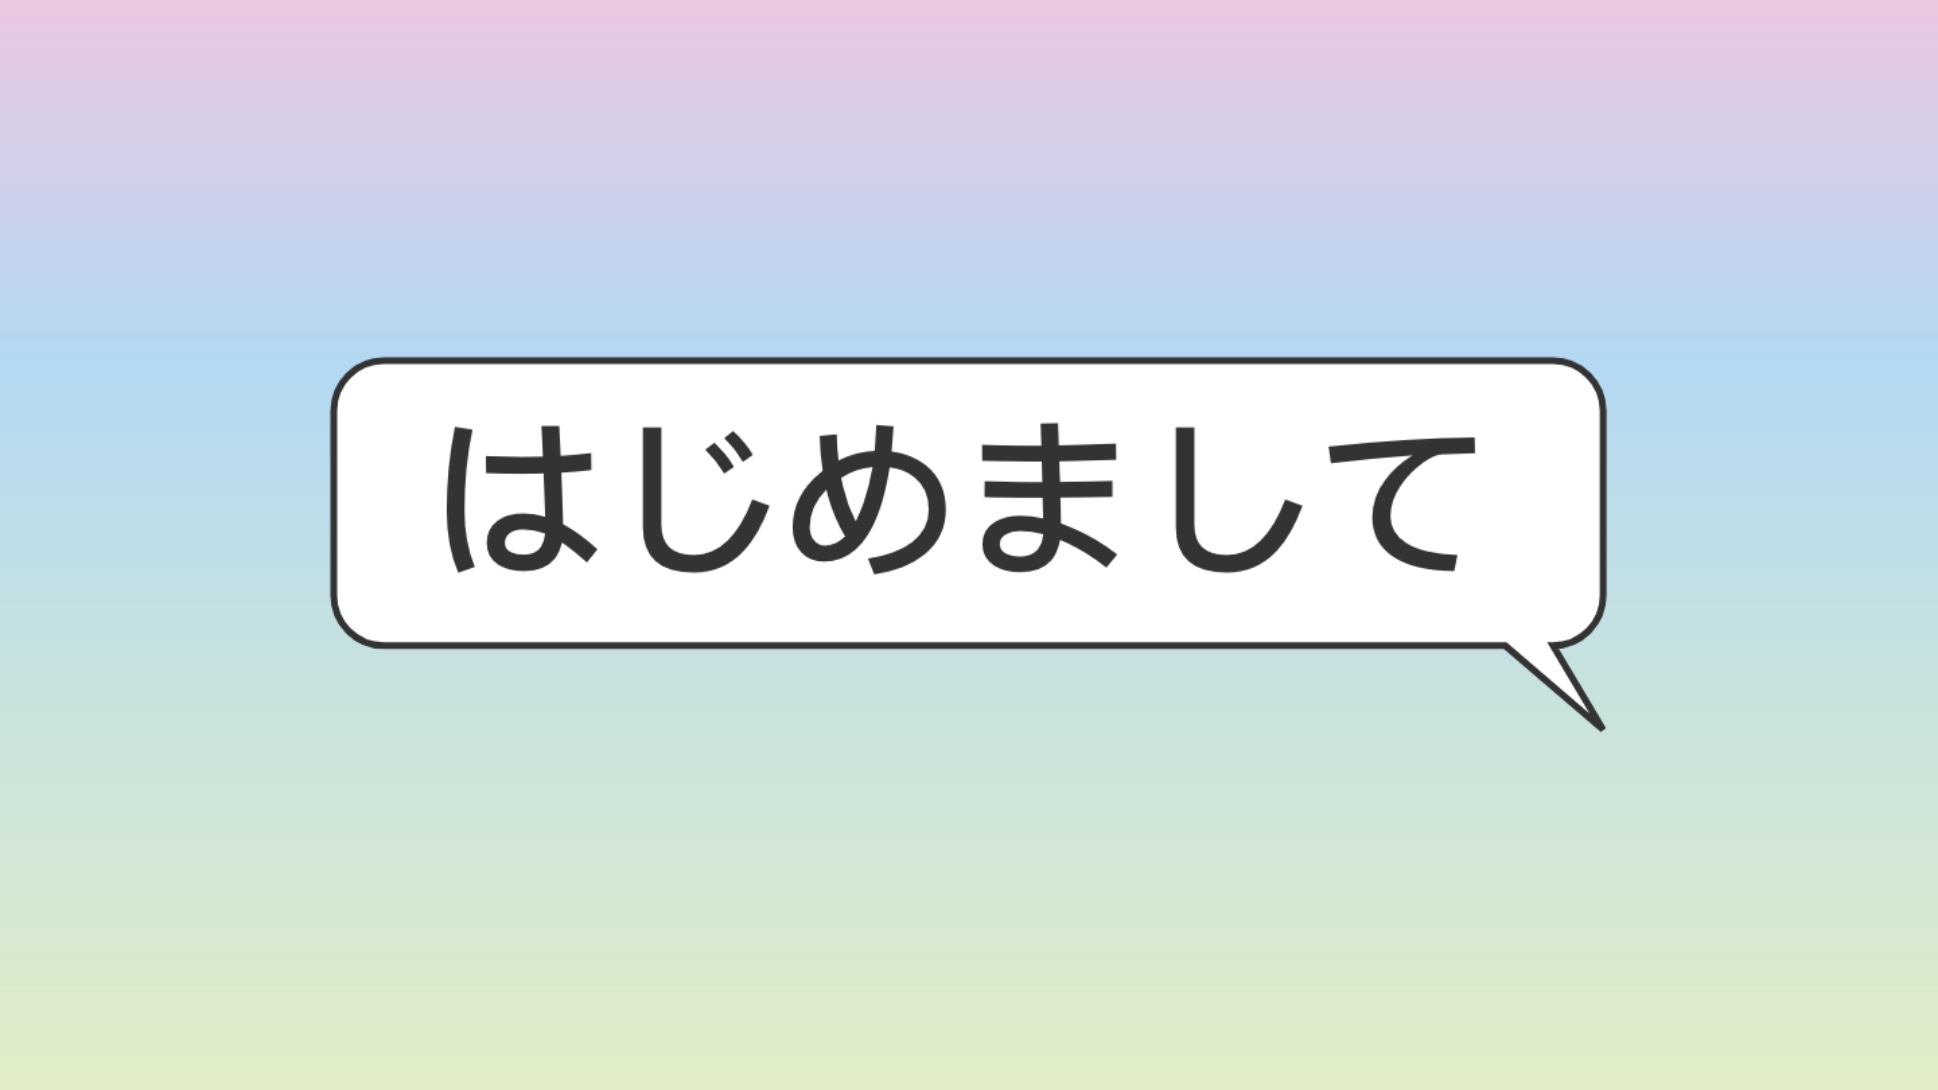 Speech bubble with Japanese characters over colorful background.